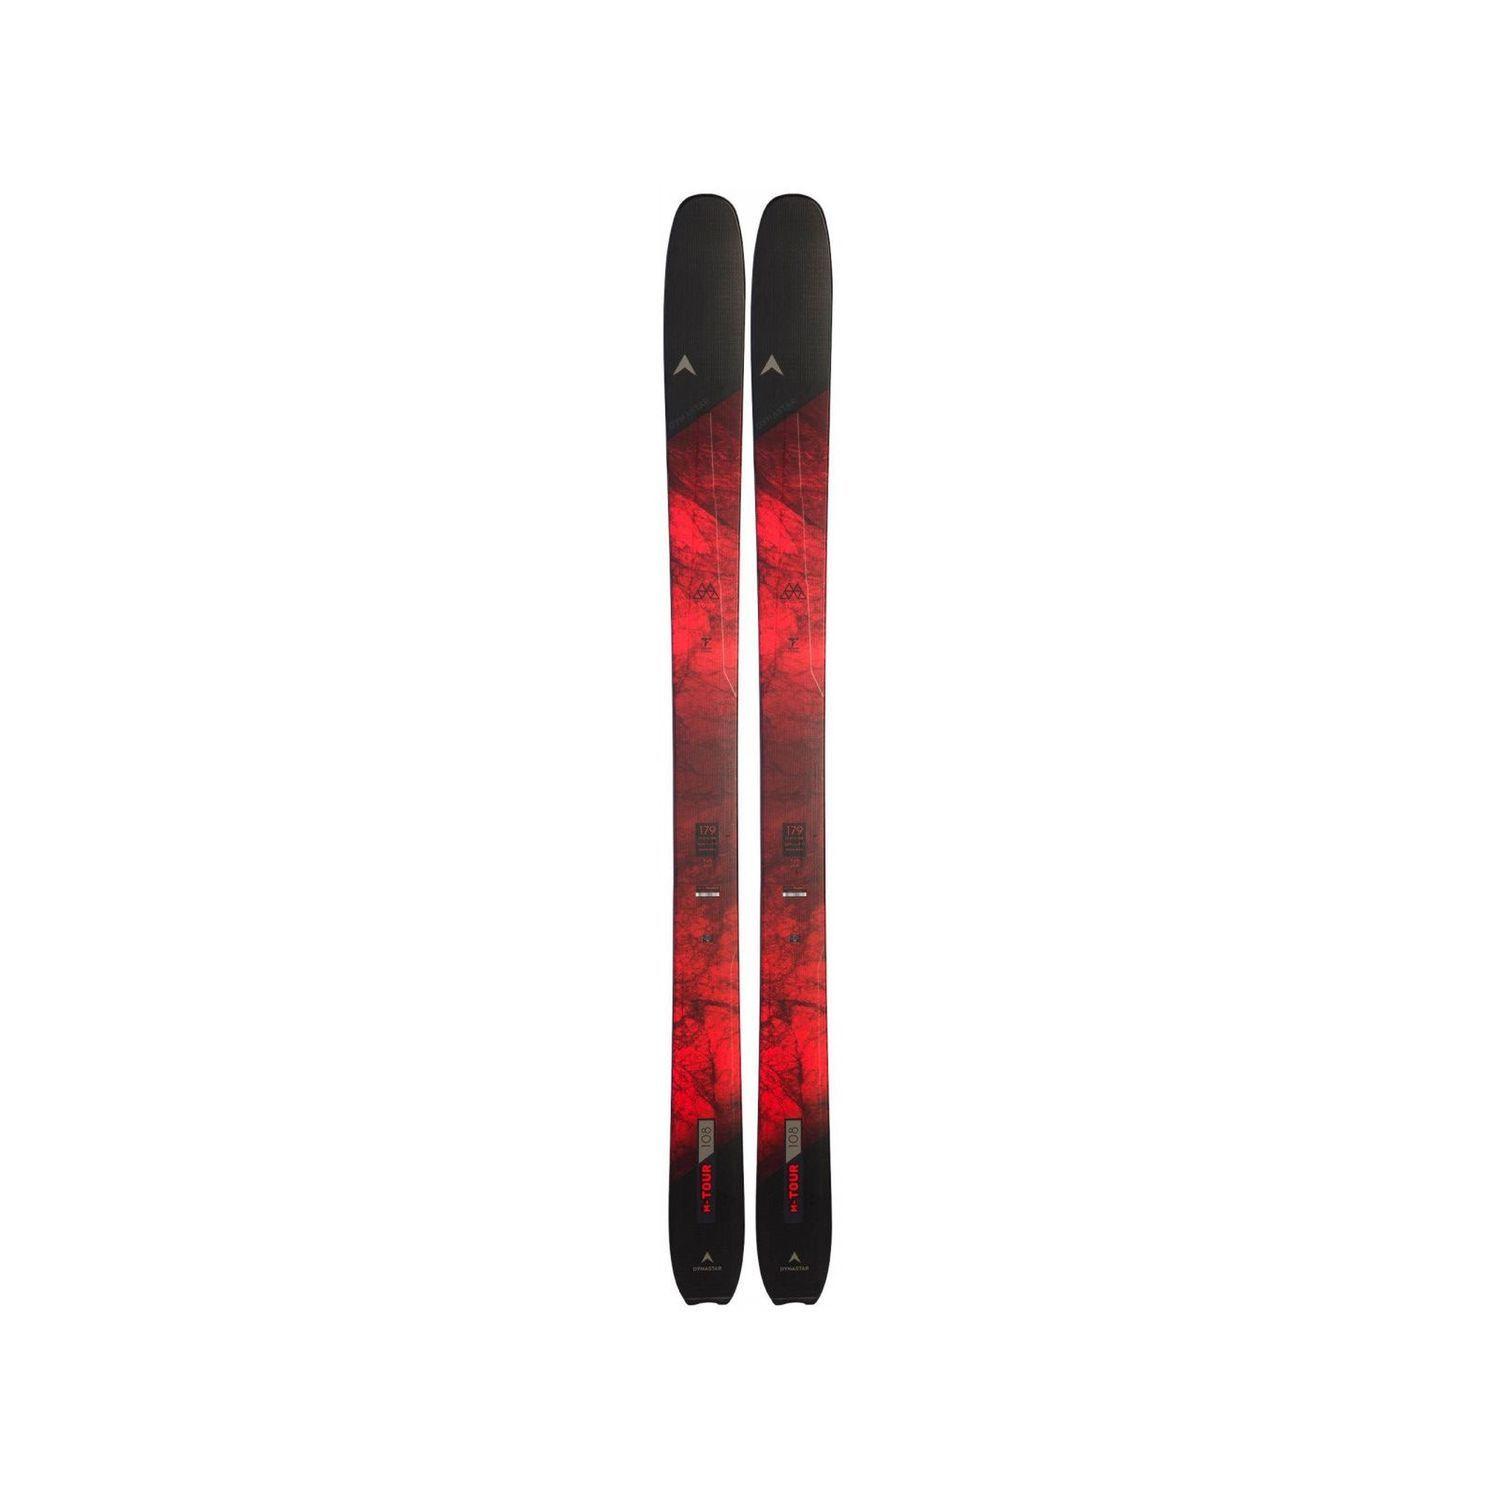 Dynastar M-Tour 108 Ski Pack + HM12 Red Men's Bindings - Free delivery!